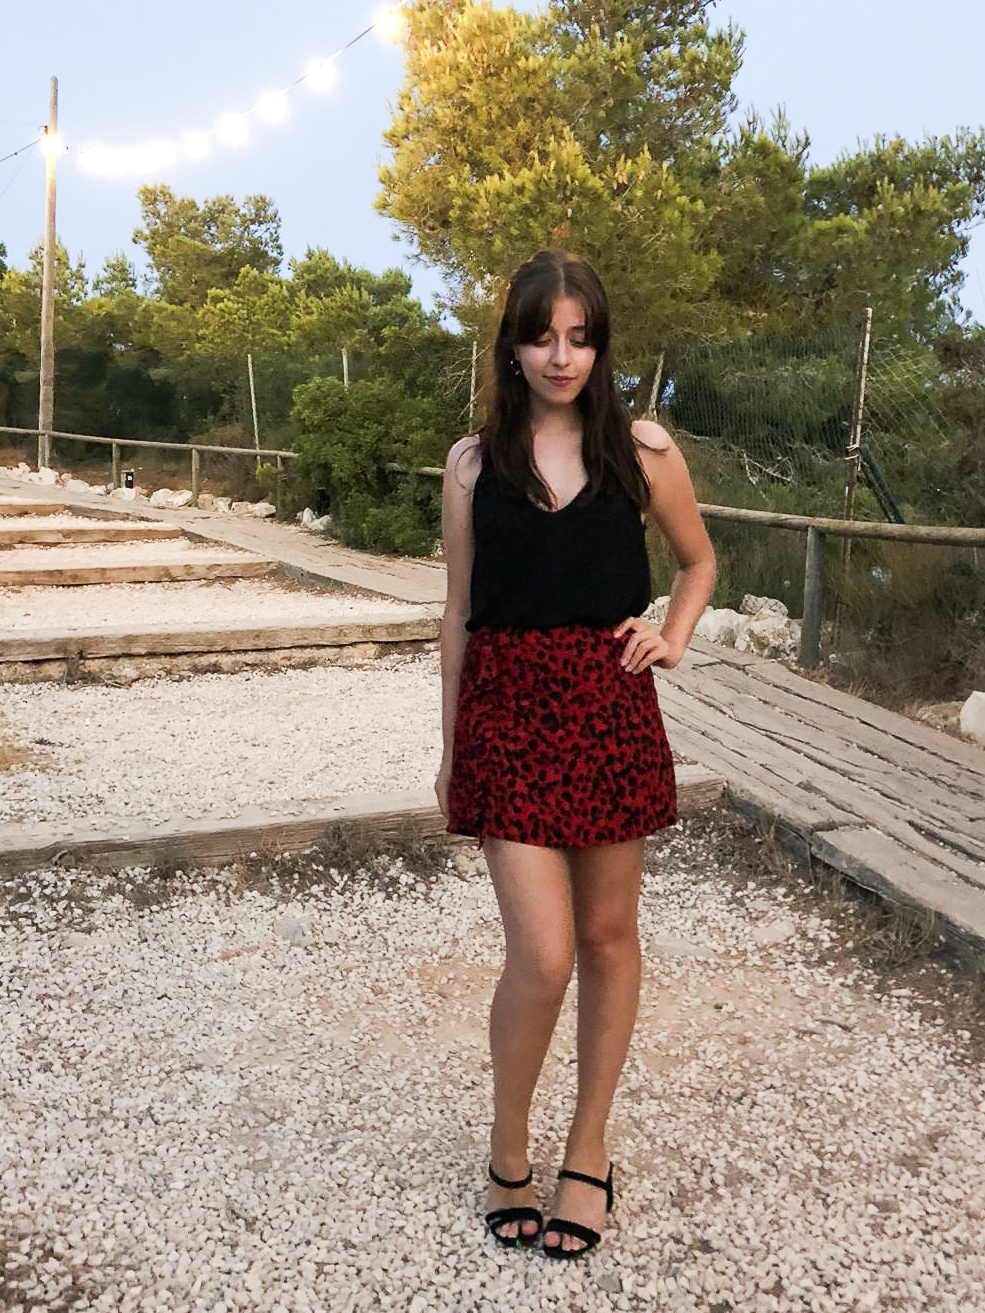 Besma wears a black top with red leopard-print skirt